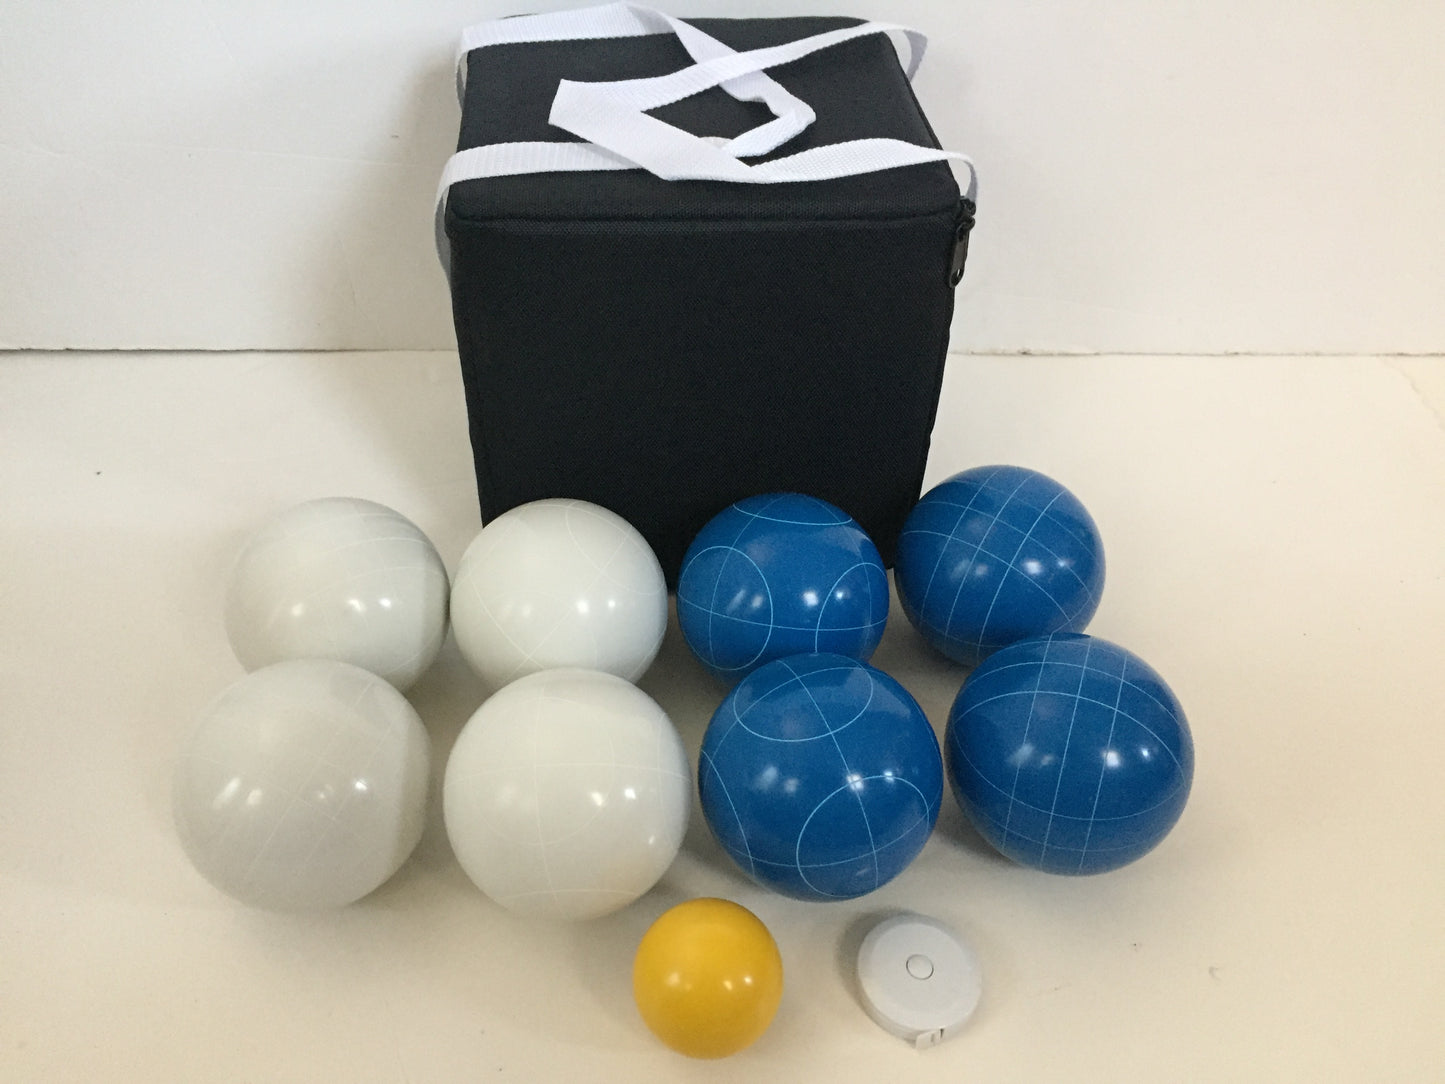 107mm with Blue and White Balls with Black Bag